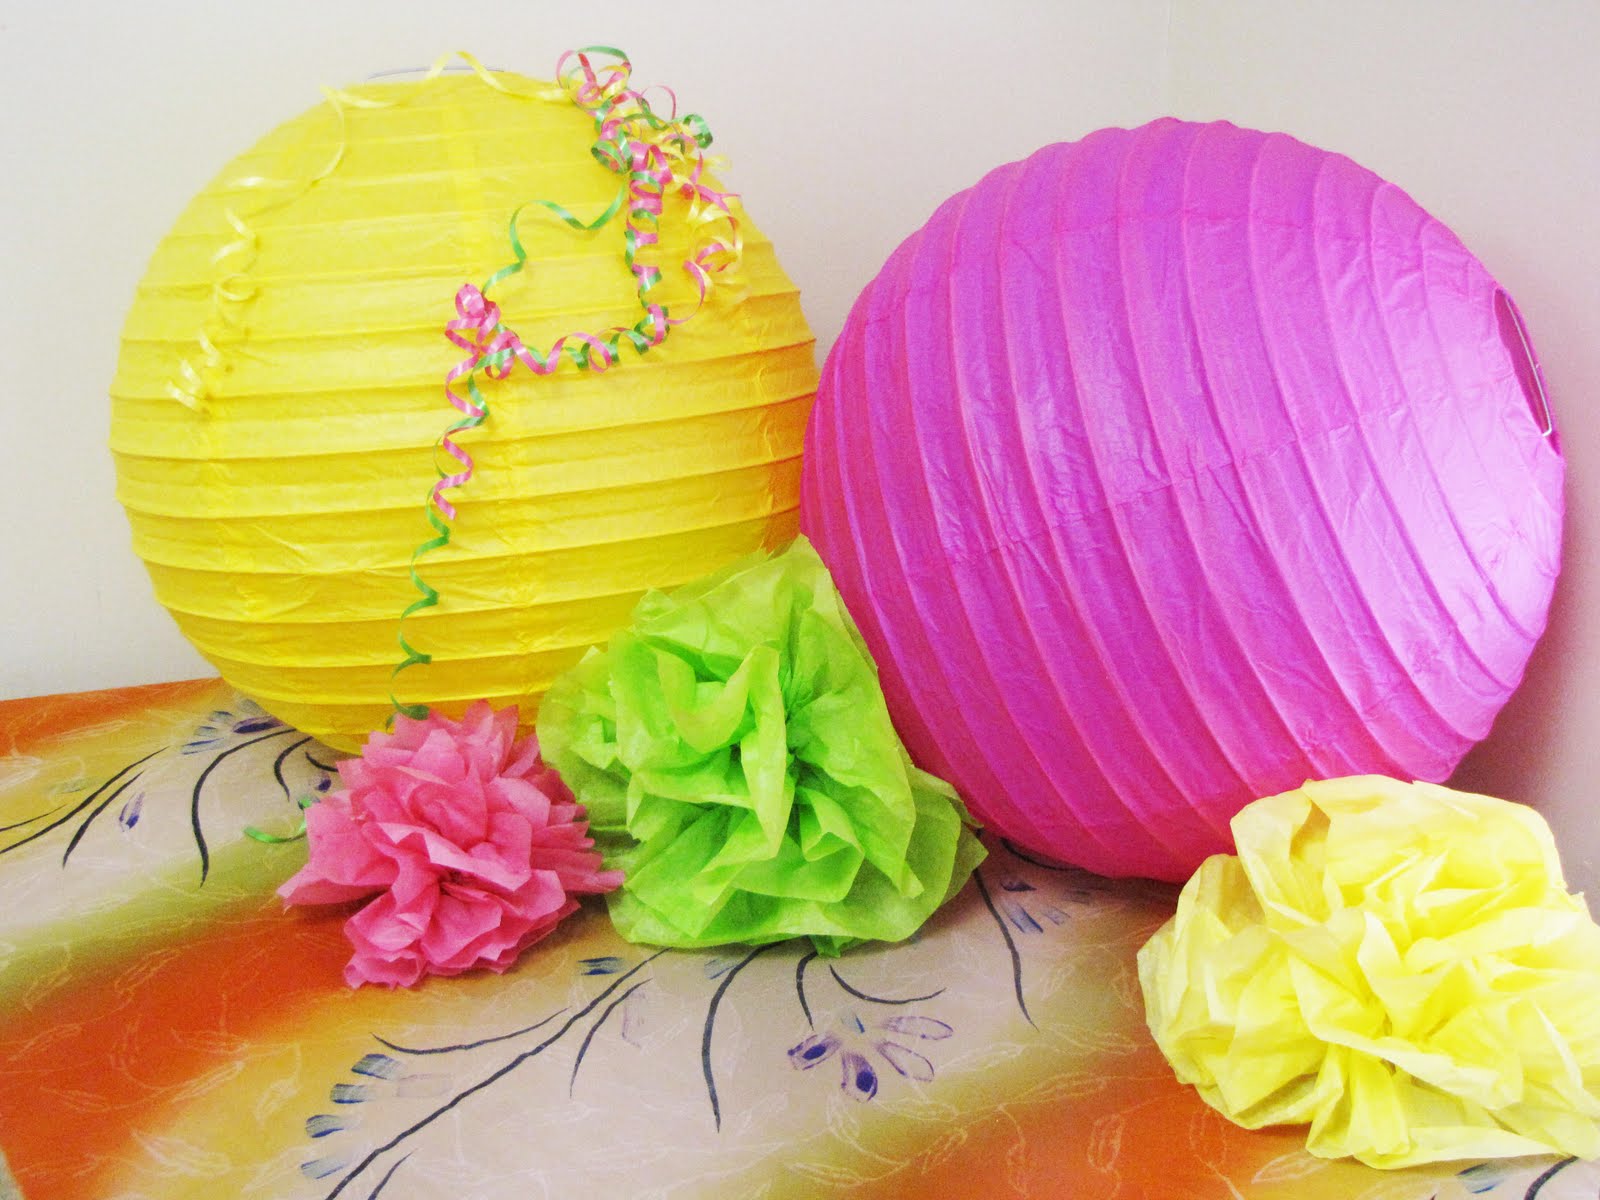 Liddy B. and me: Super Easy Tissue Paper Decorations